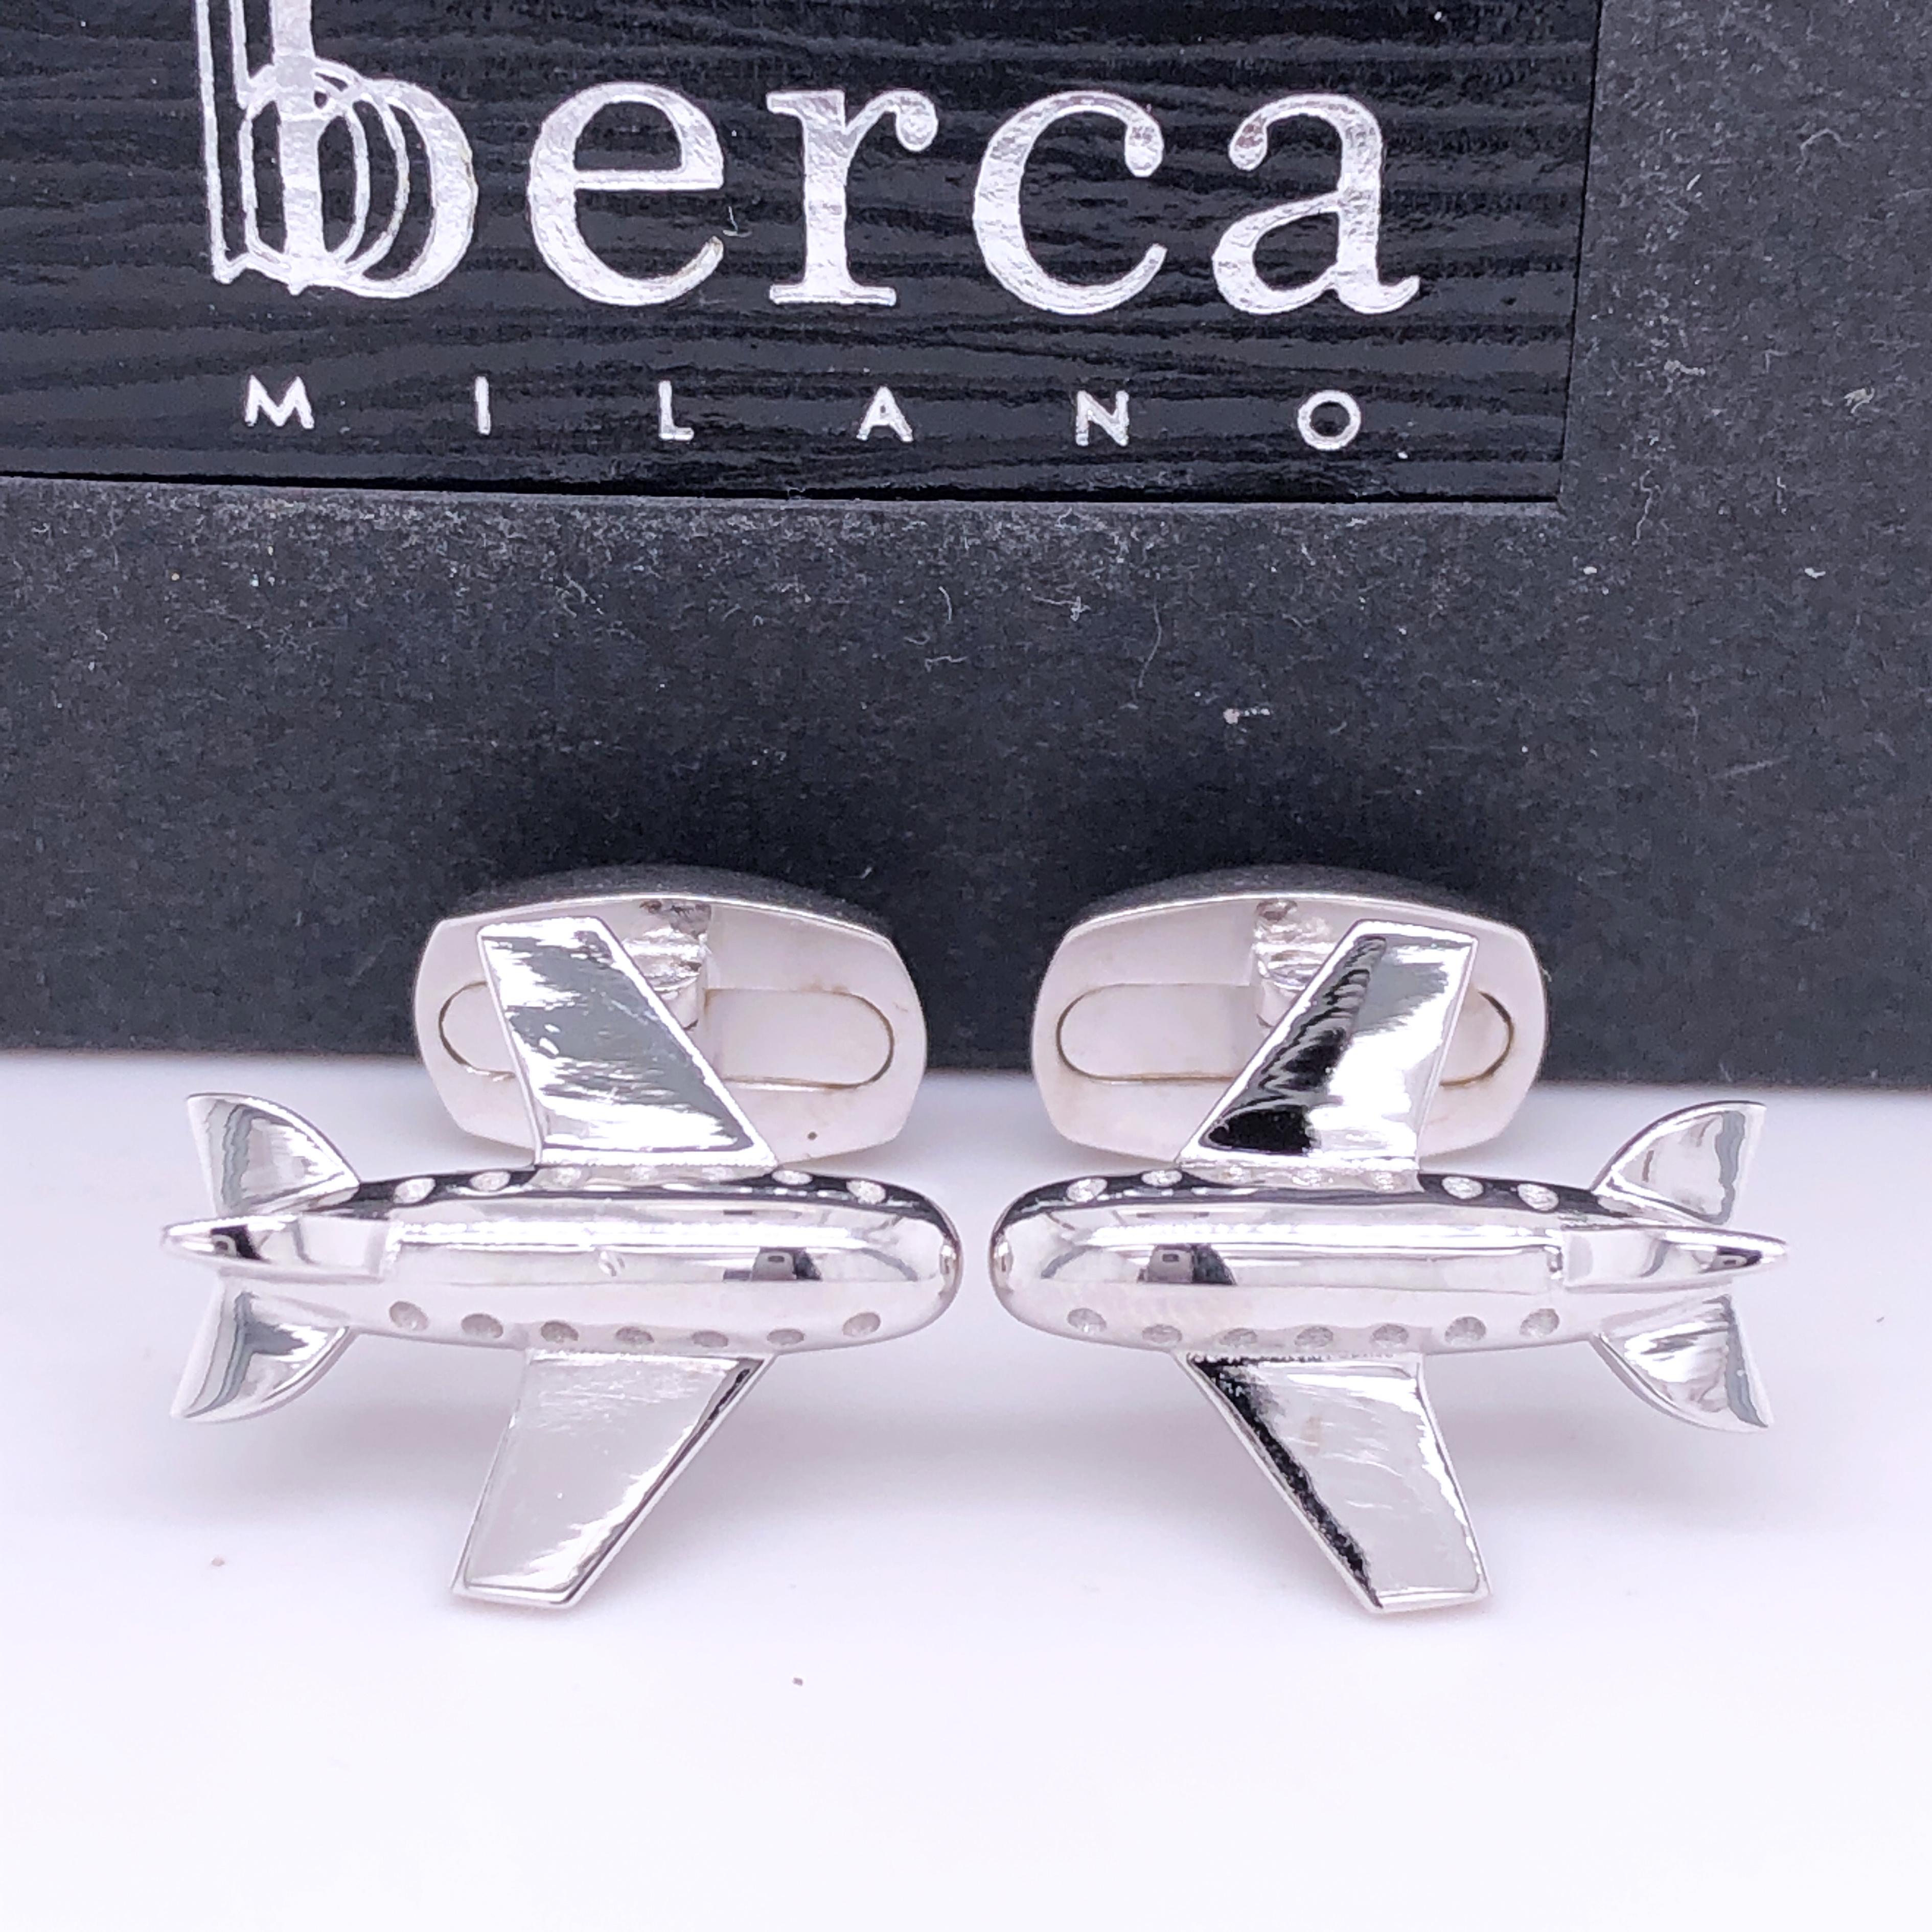 Unique, Absolutely Chic, Hand Crafted by our expert Silversmiths, Airplane Shaped Solid Sterling Silver Cufflinks.

In our Smart Black Box and Pouch.
